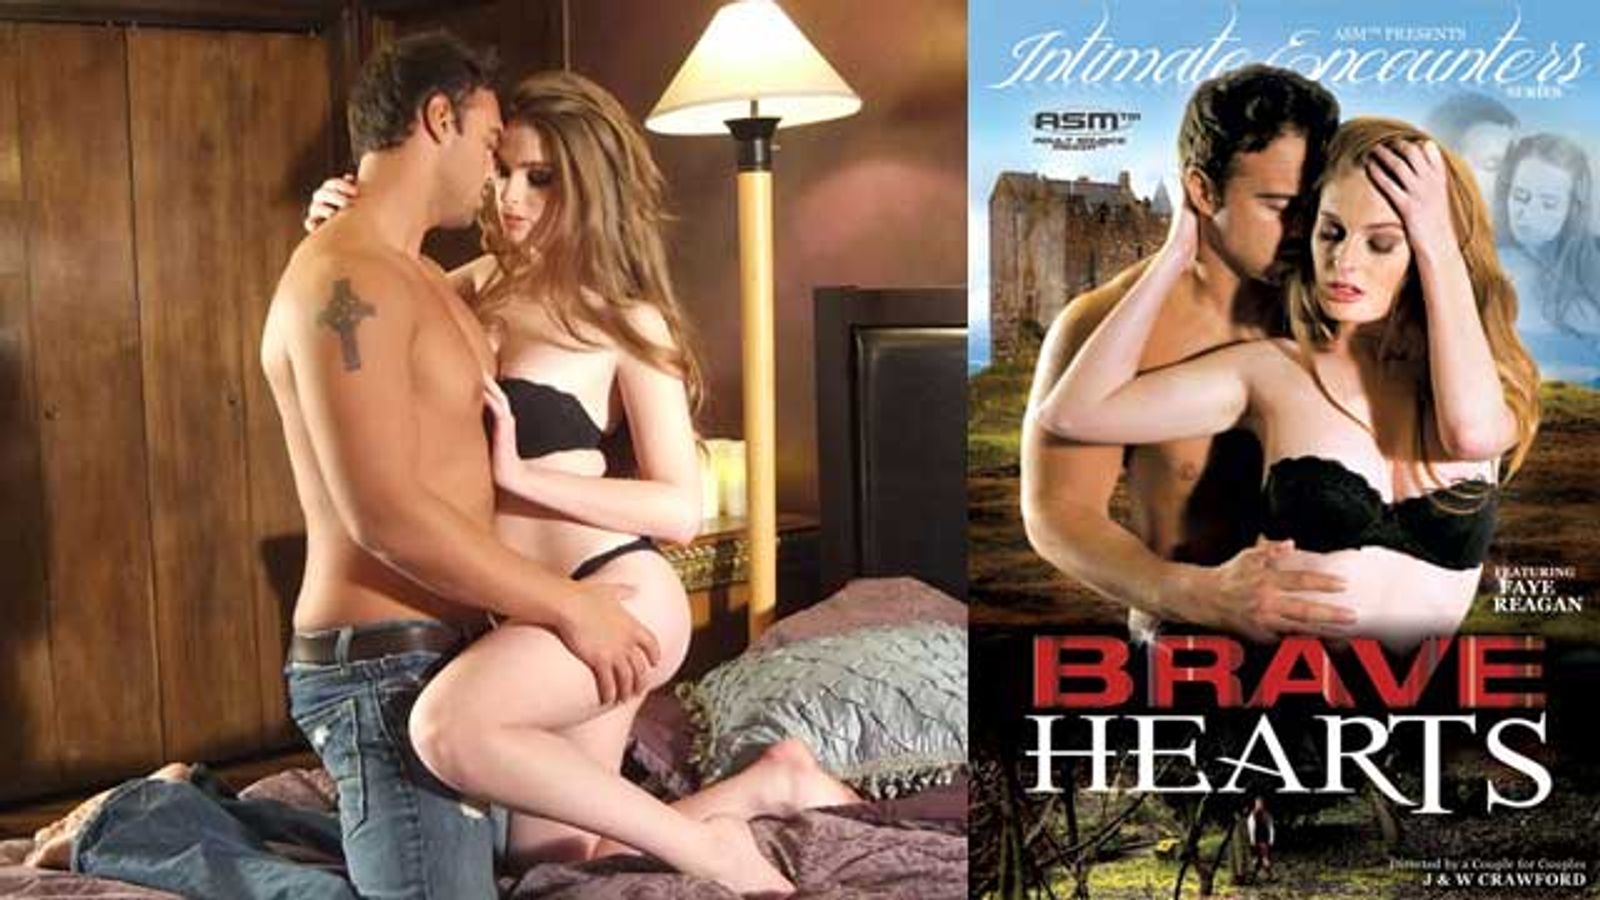 Intimate Encounters' 'Brave Hearts' To Ship January 10